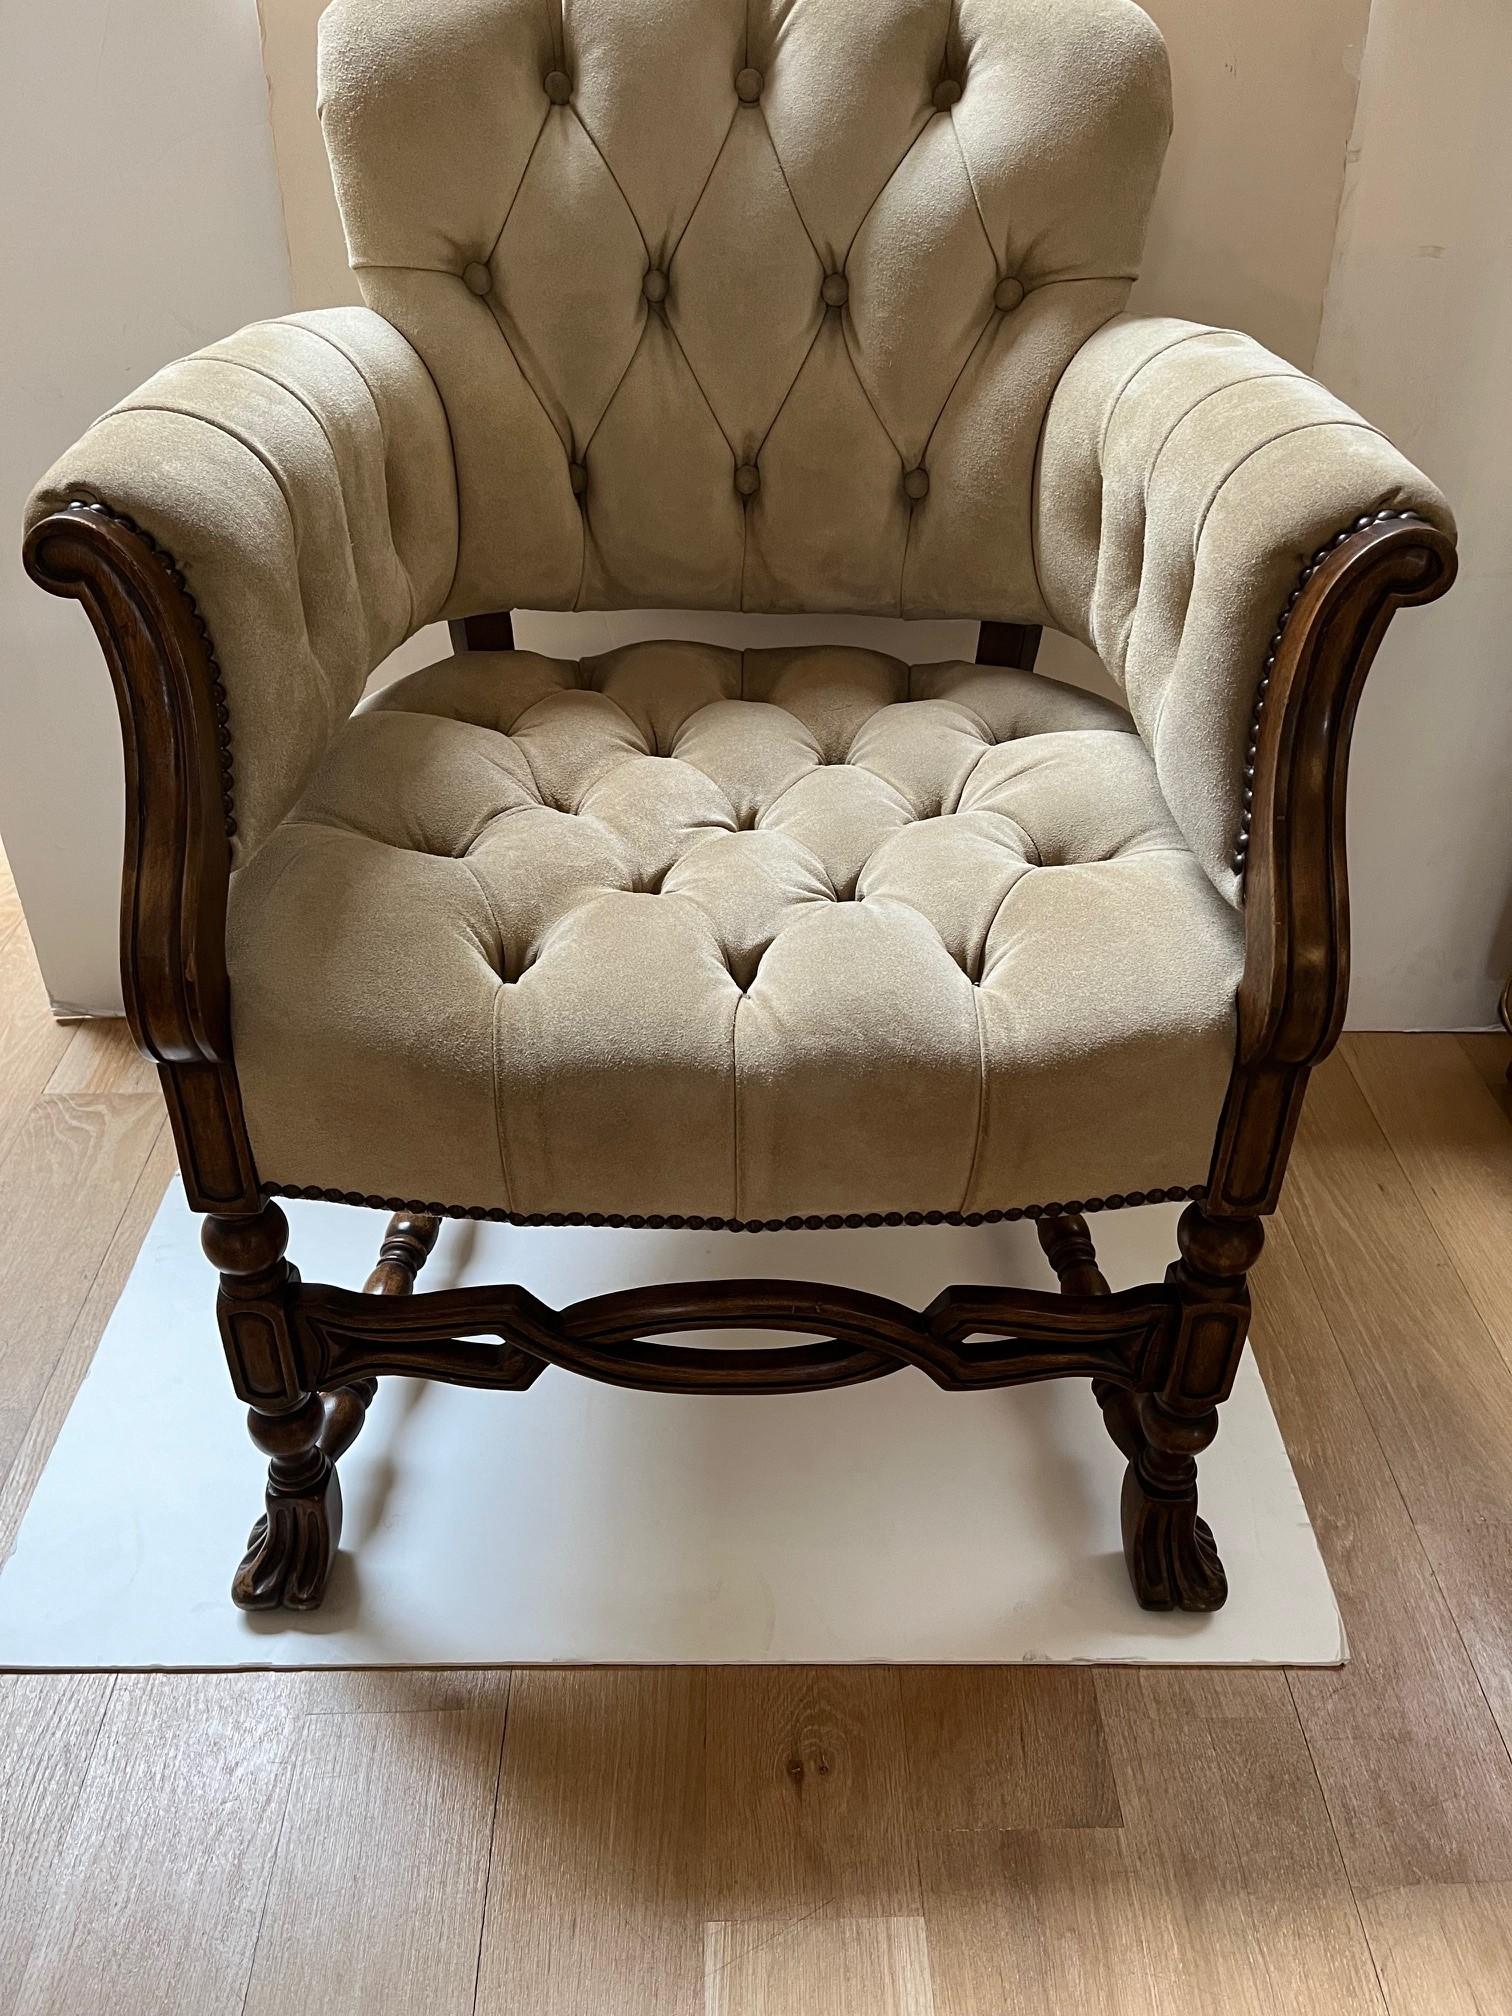 American Made to Order Elegant Tufted Seat and Back in Beige Suede Leather Seville Chair For Sale